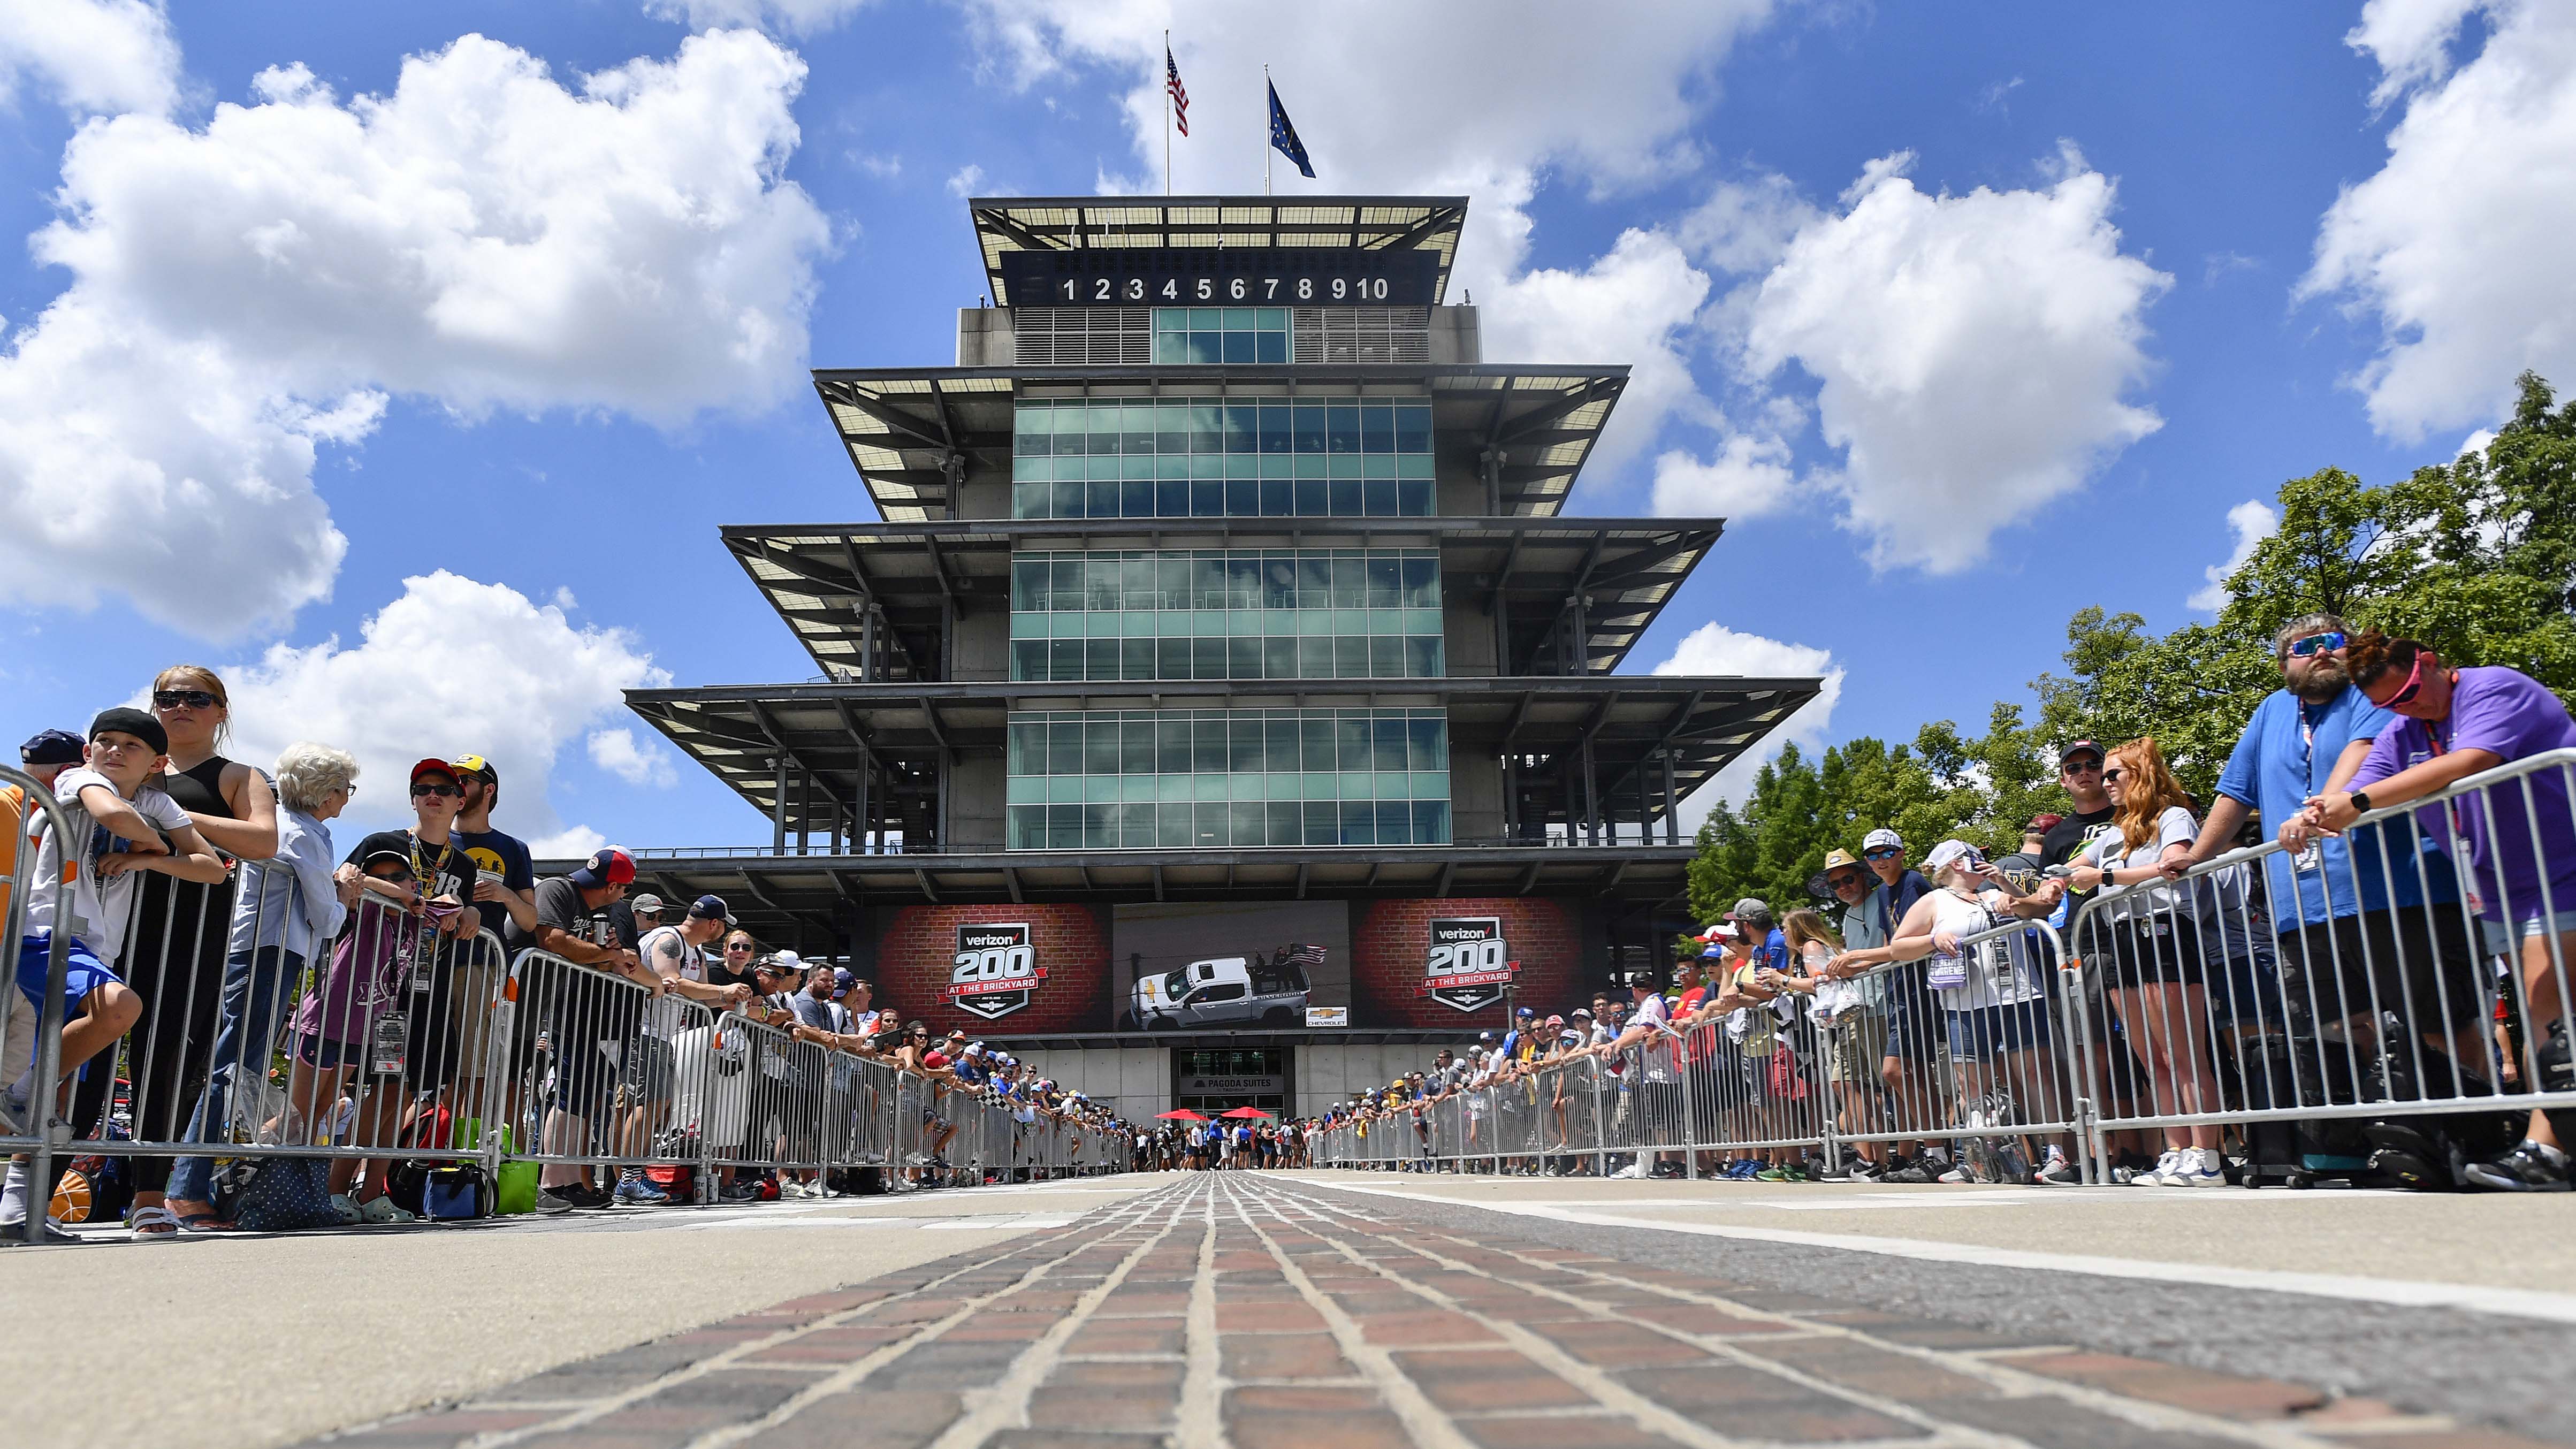 NASCAR at the Brickyard: Schedule, watch info, favorites for Indianapolis